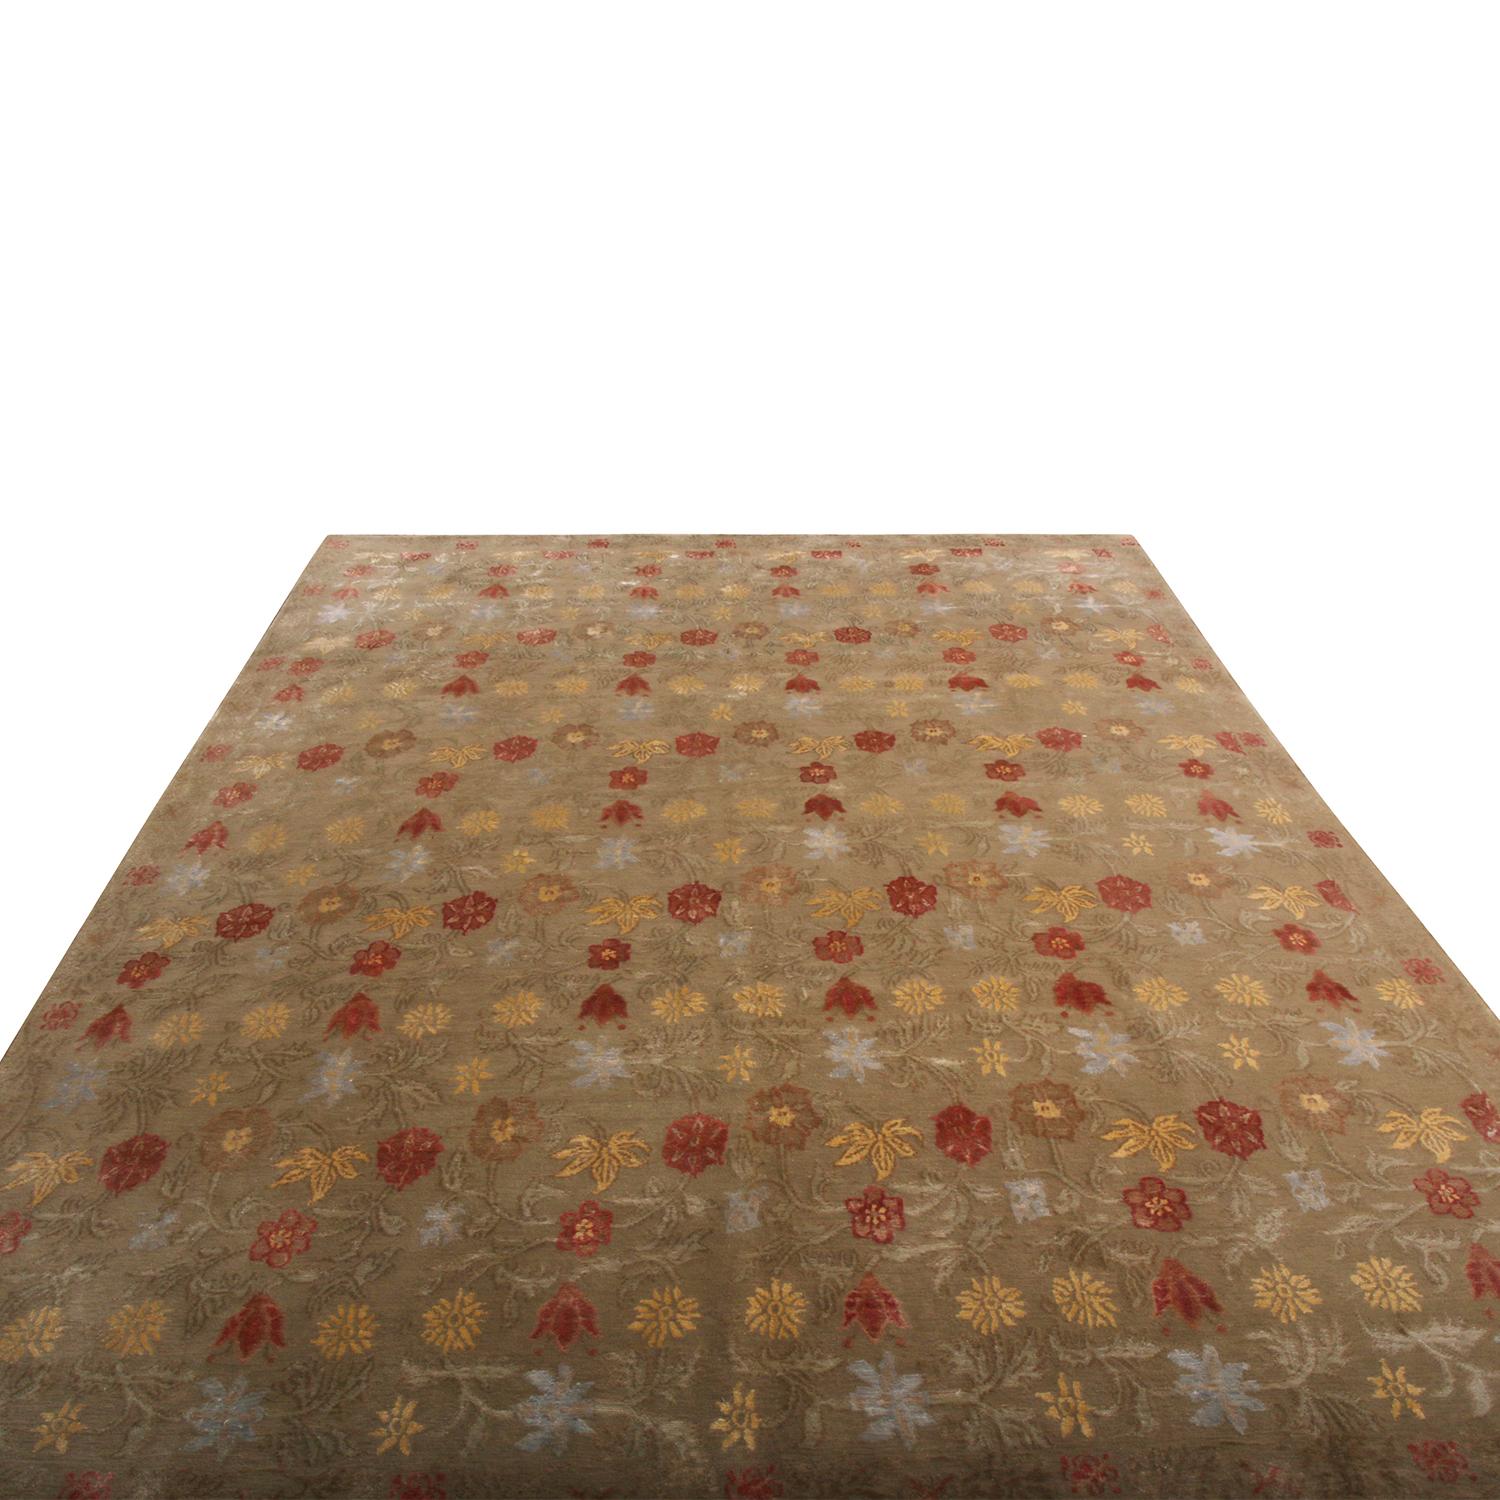 Hand-knotted in premium wool & silk, an 8x10 ode to classic rugs from Rug & Kilim’s European collection inspired from Spanish floral sensibilities transitioning smoothly in subtle brown, pink-red, gold & silver for a reflective and comforting vibe